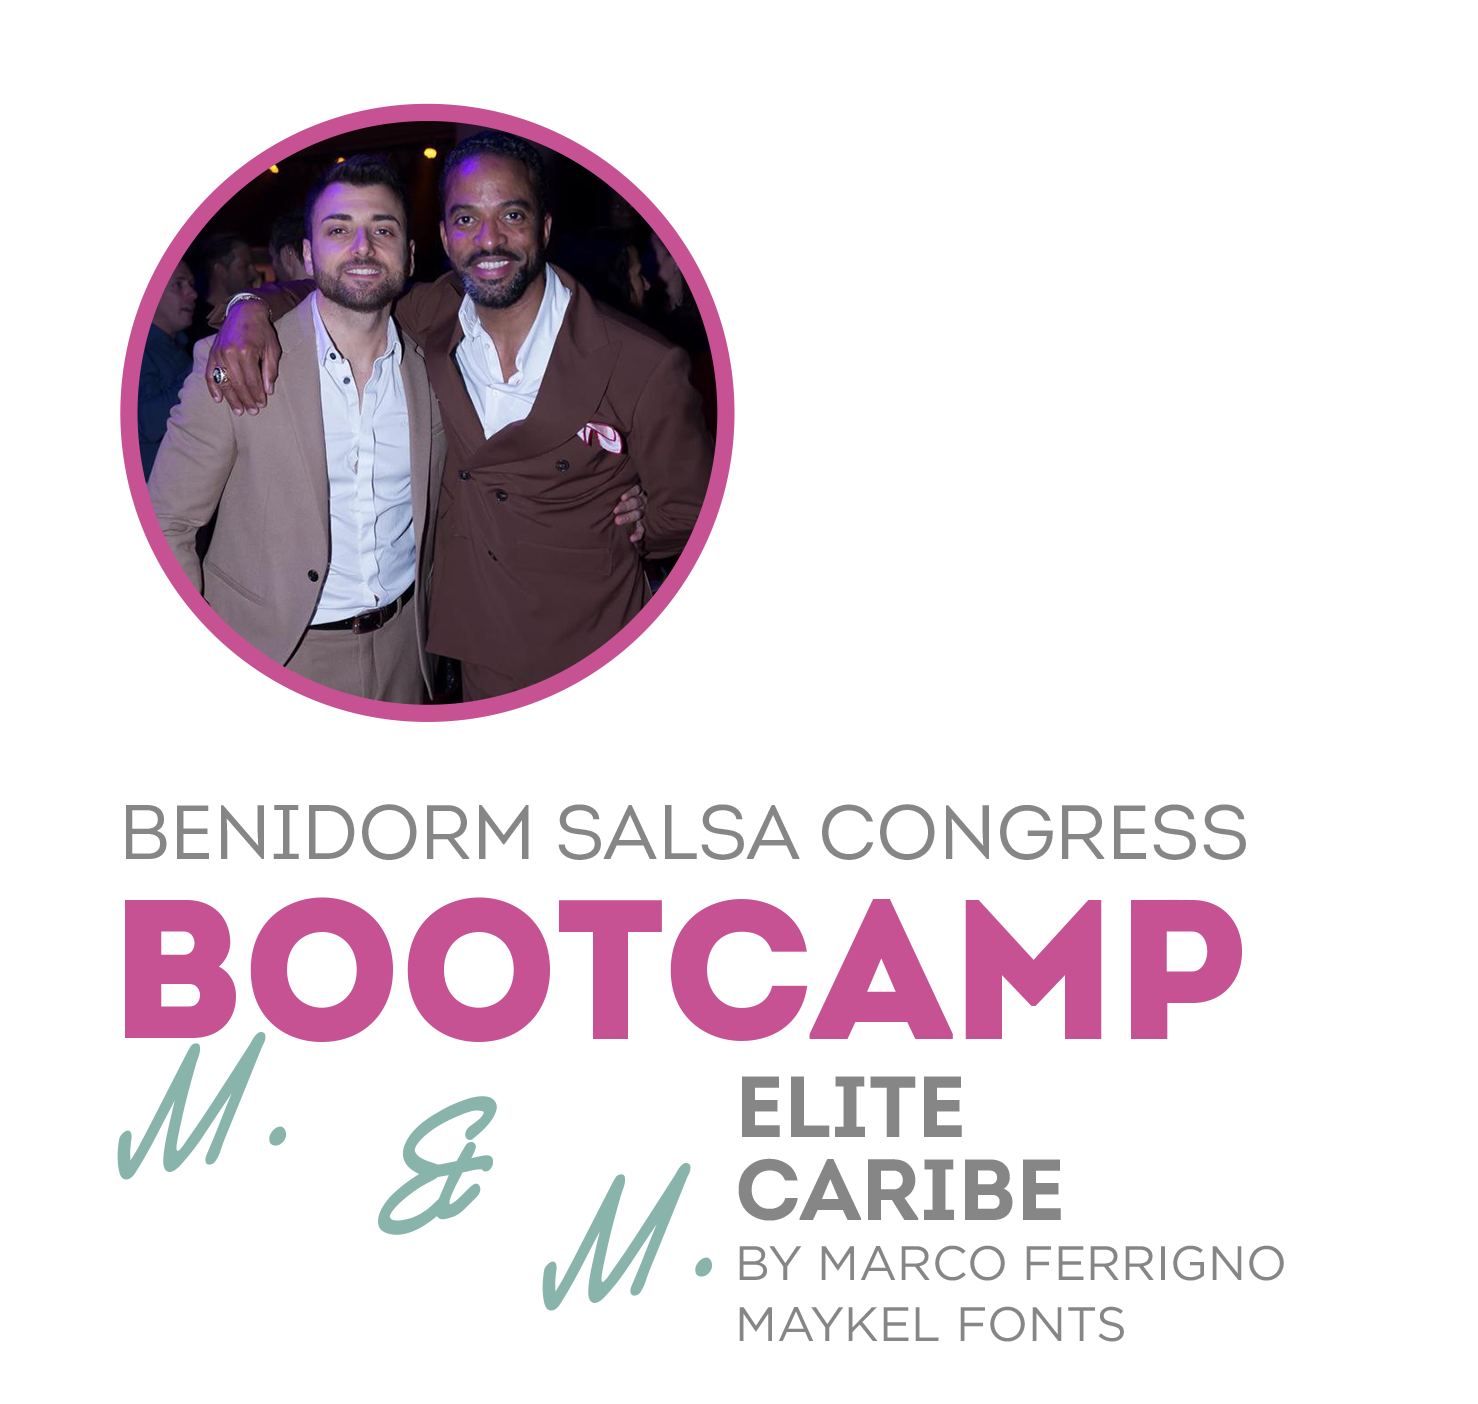 BootCamp Marco Ferrigno & Maykel Fonts